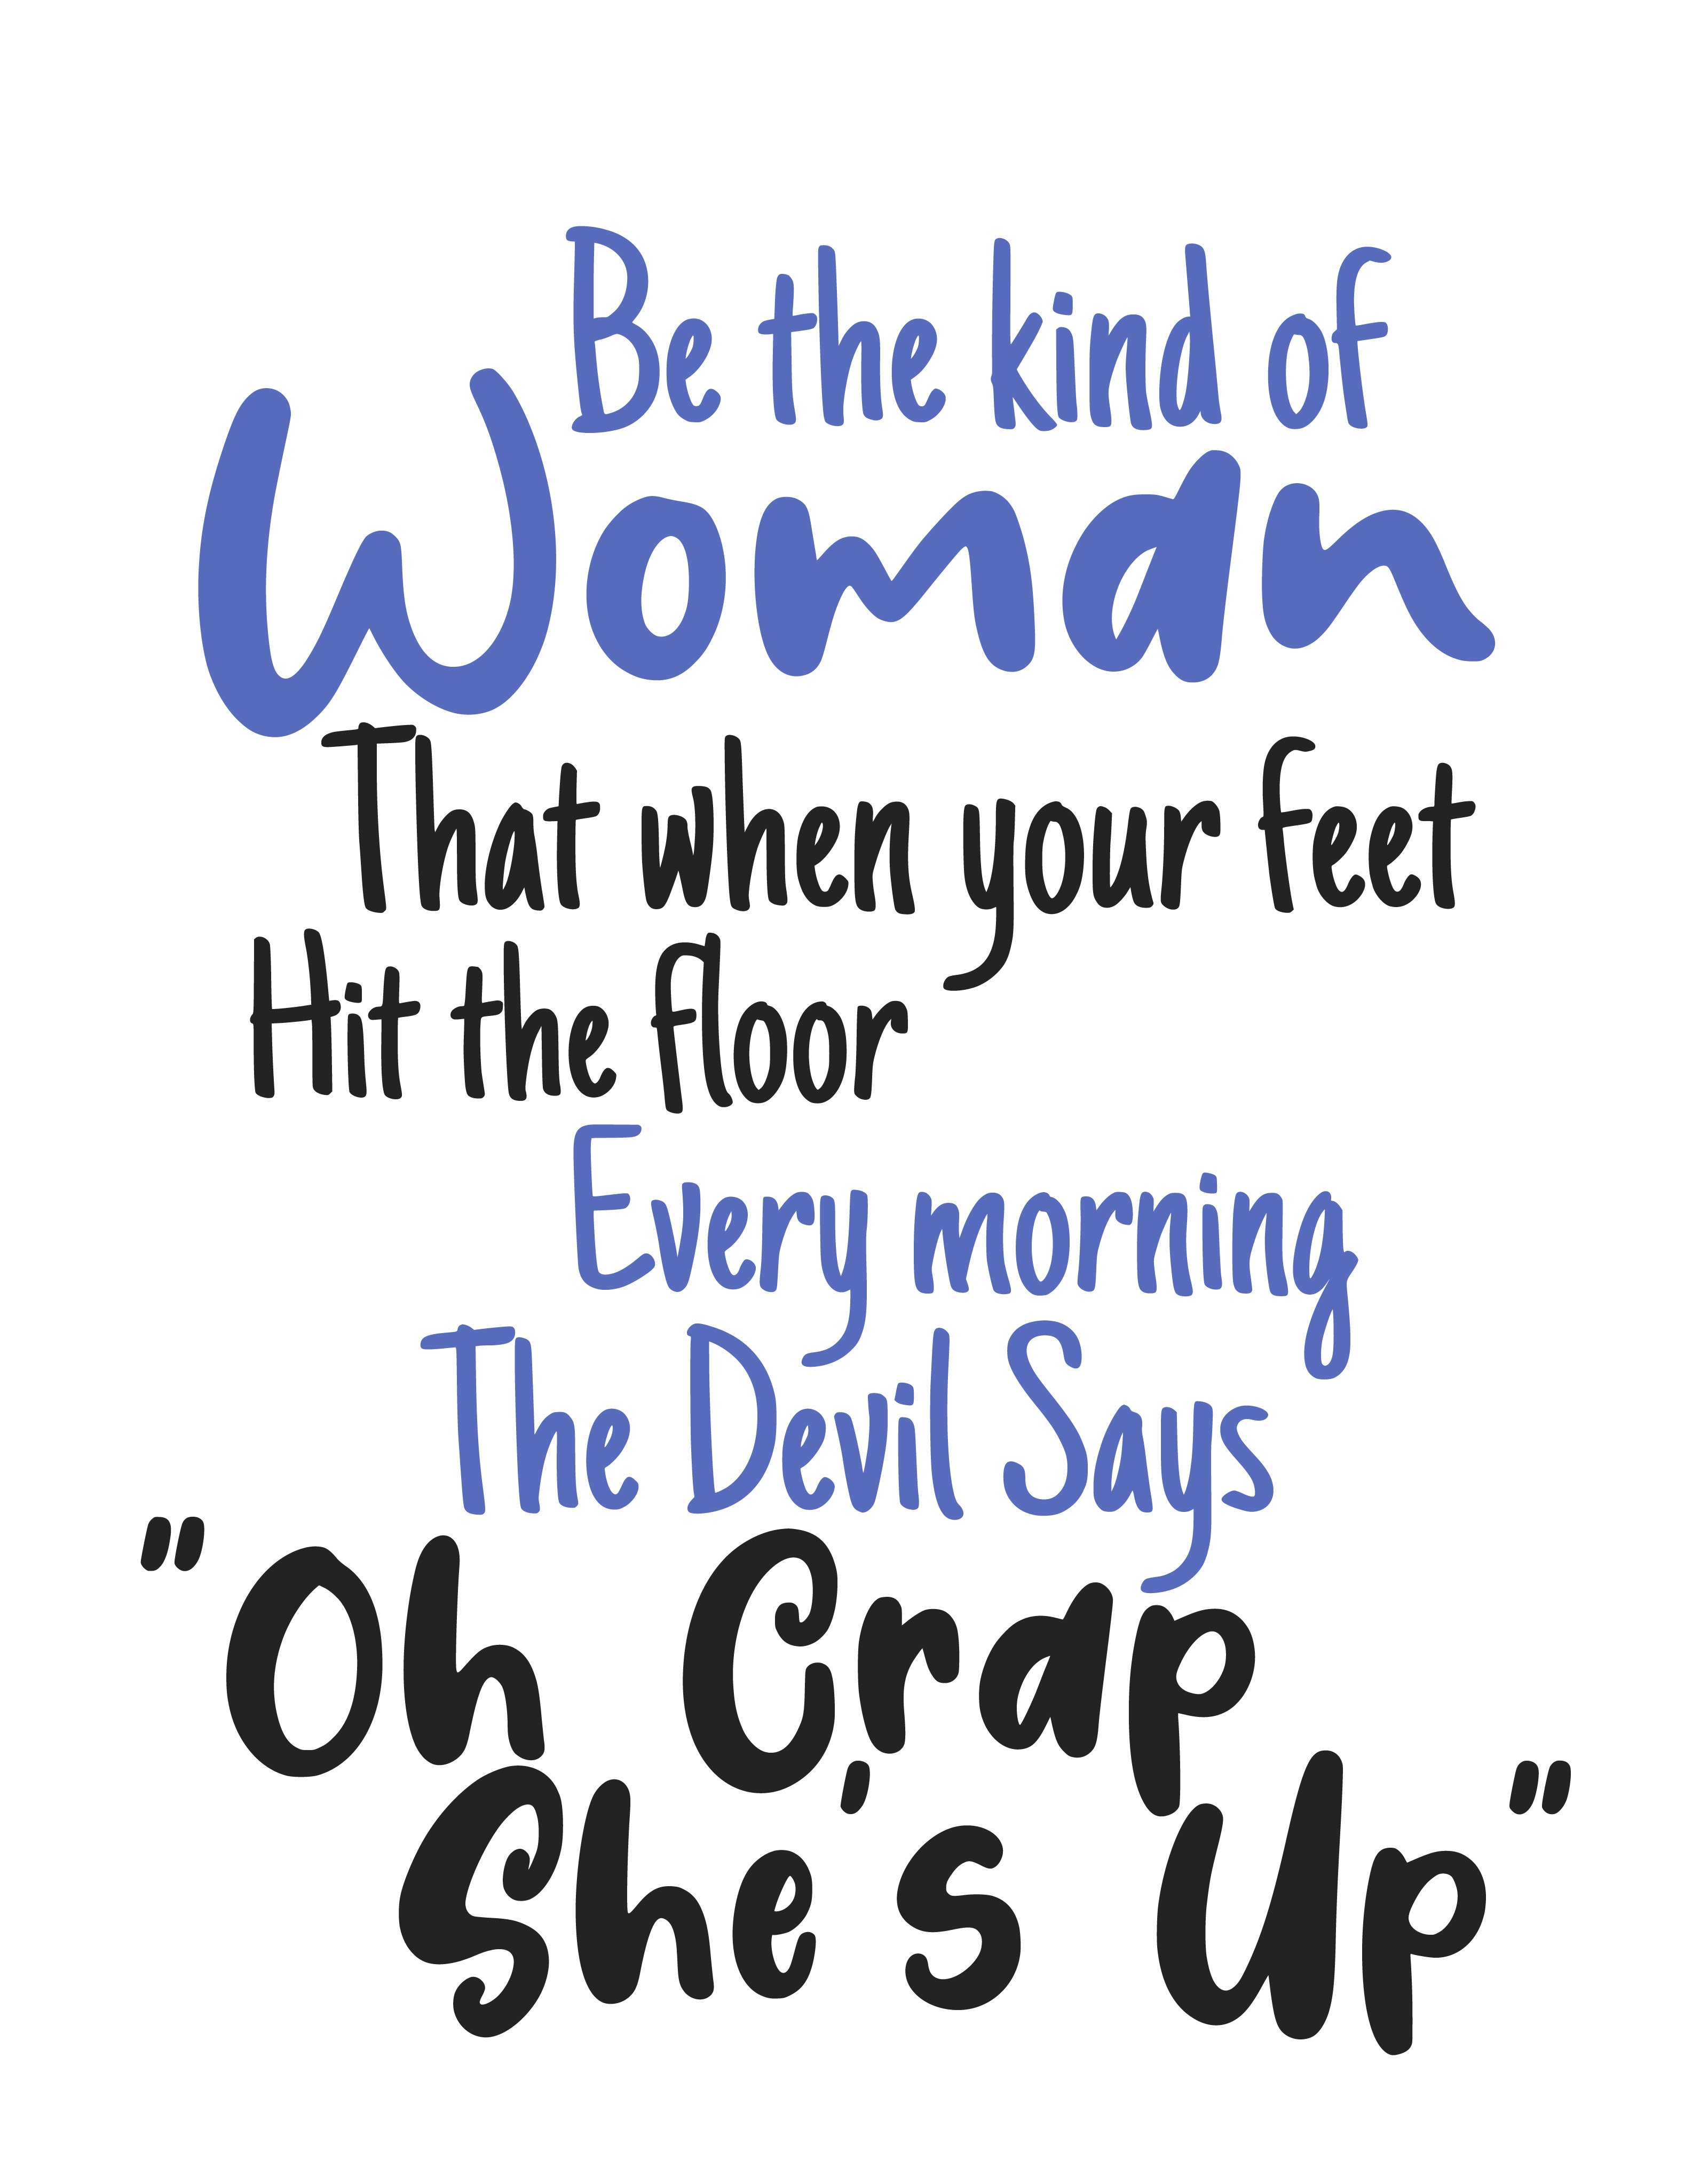 Be the kind of woman that when your feet hit the floor every morning the devil says oh crap she's up SVG Boss Lady  Black Lives Matter  Lady Woman Diva Tshirt Cut File Cricut Silhouette Women Empowerment svg Feminism svg Girl Power
